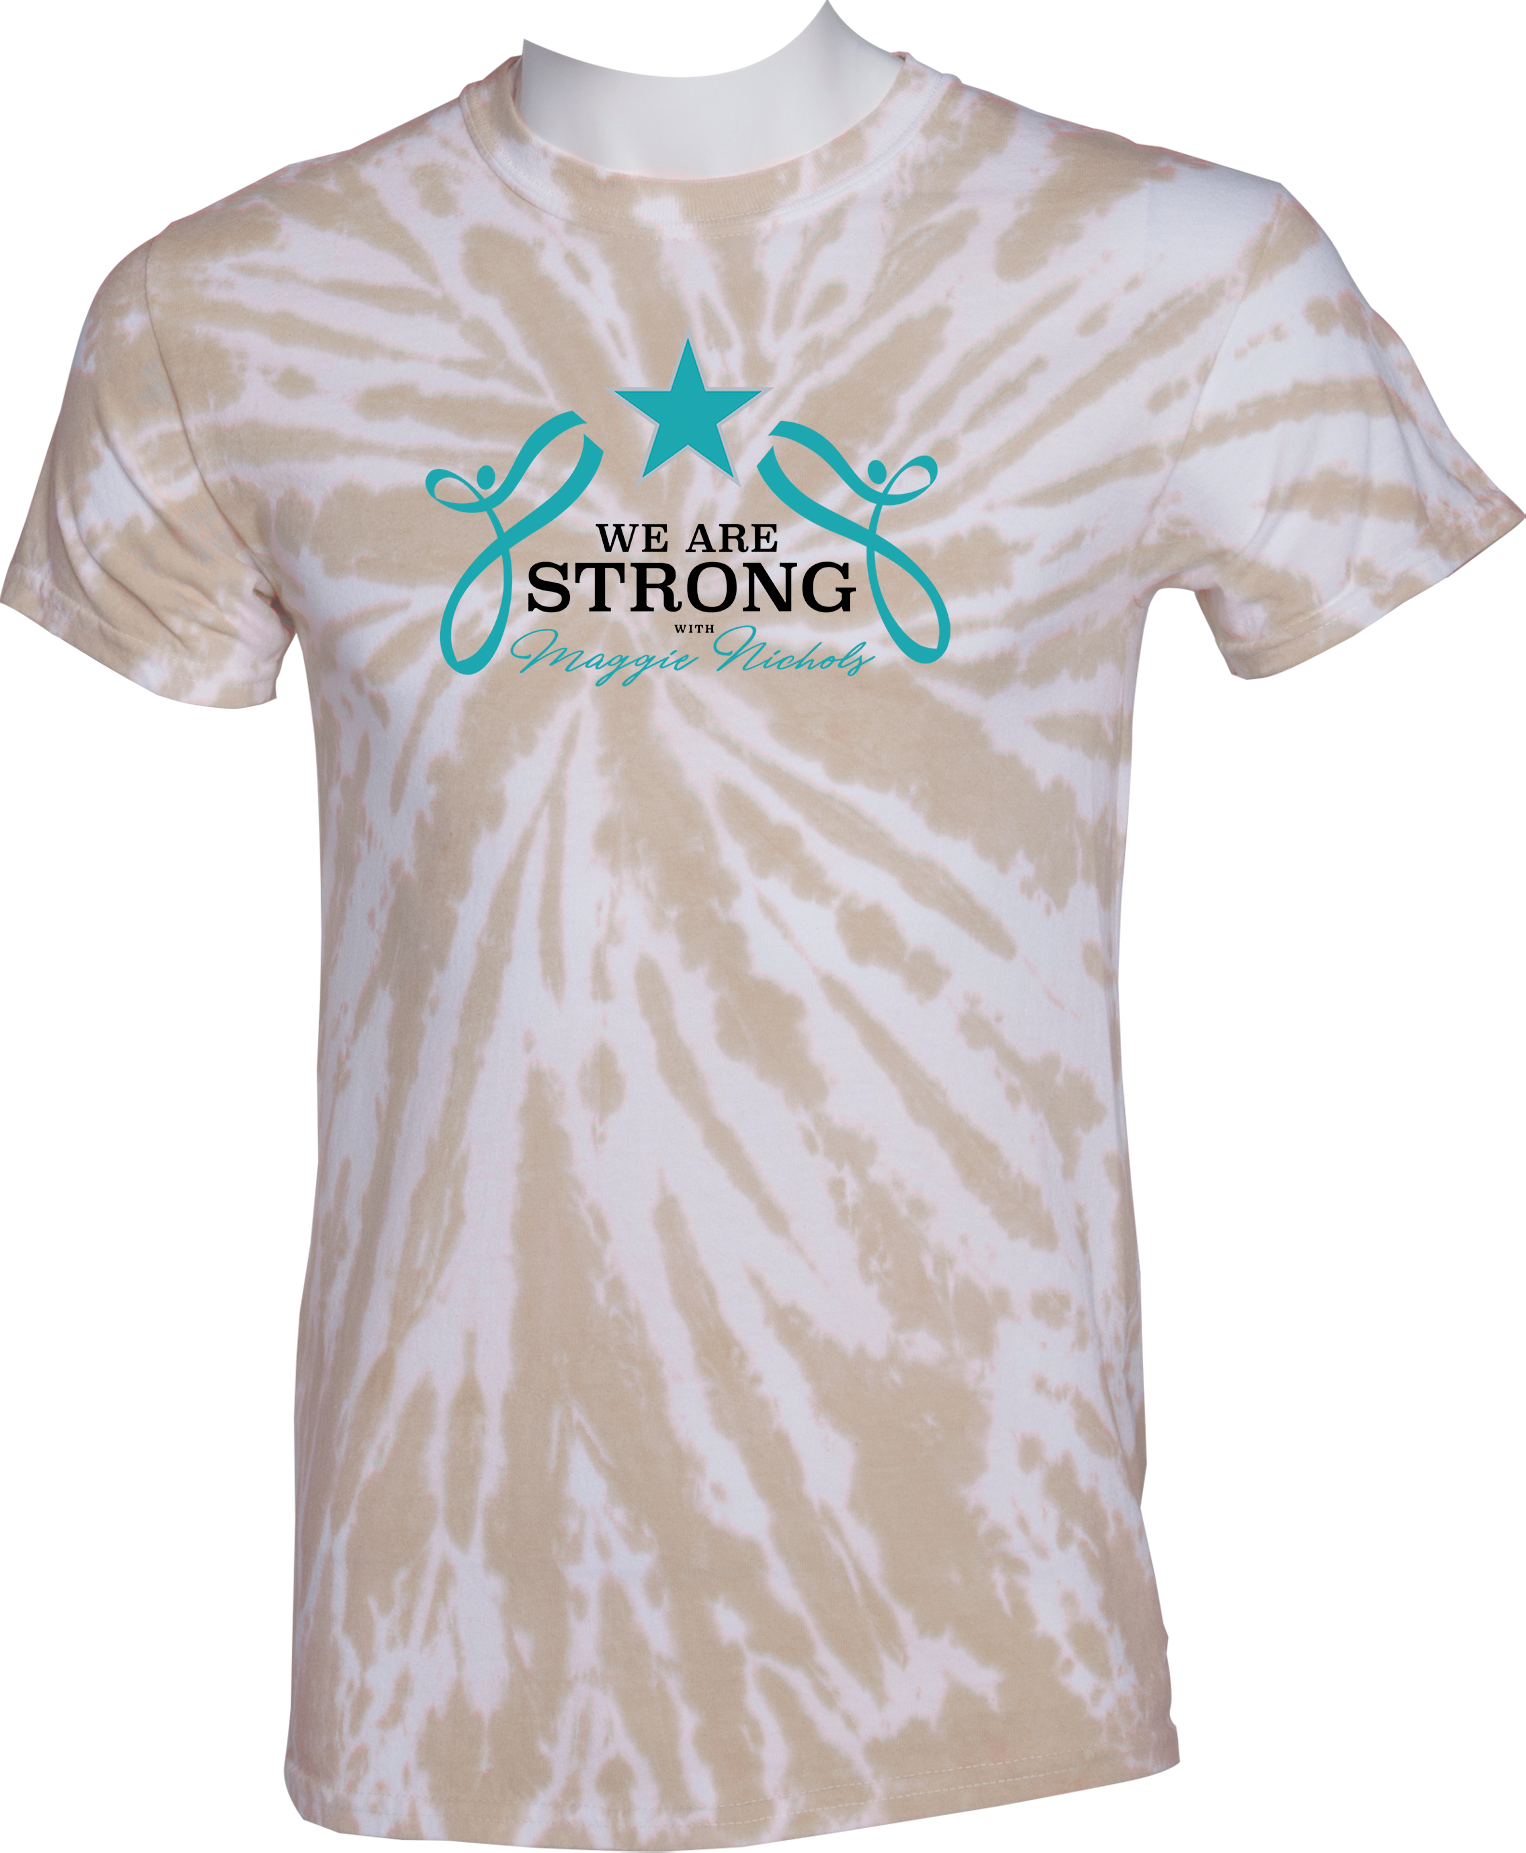 TIE-DYE SHORT SLEEVES - 2023 We Are Strong with Maggie Nichols